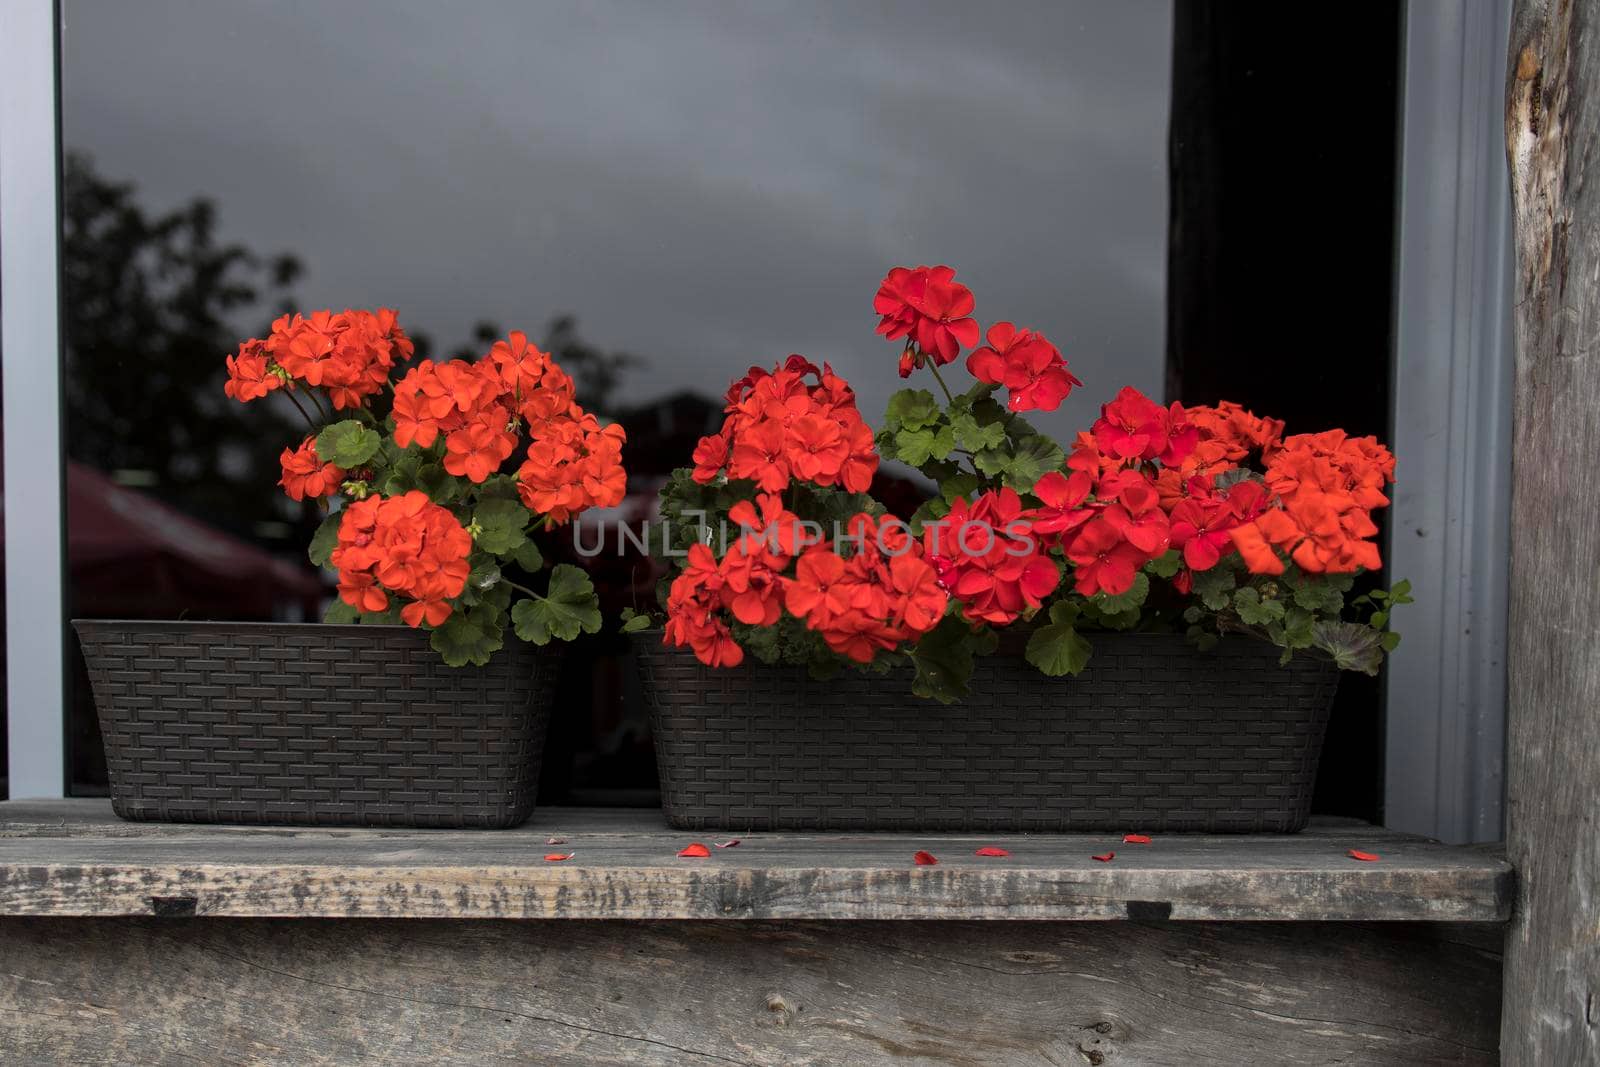 Crates of red blooming geraniums adorn the windowsill of an outdoor cafe.